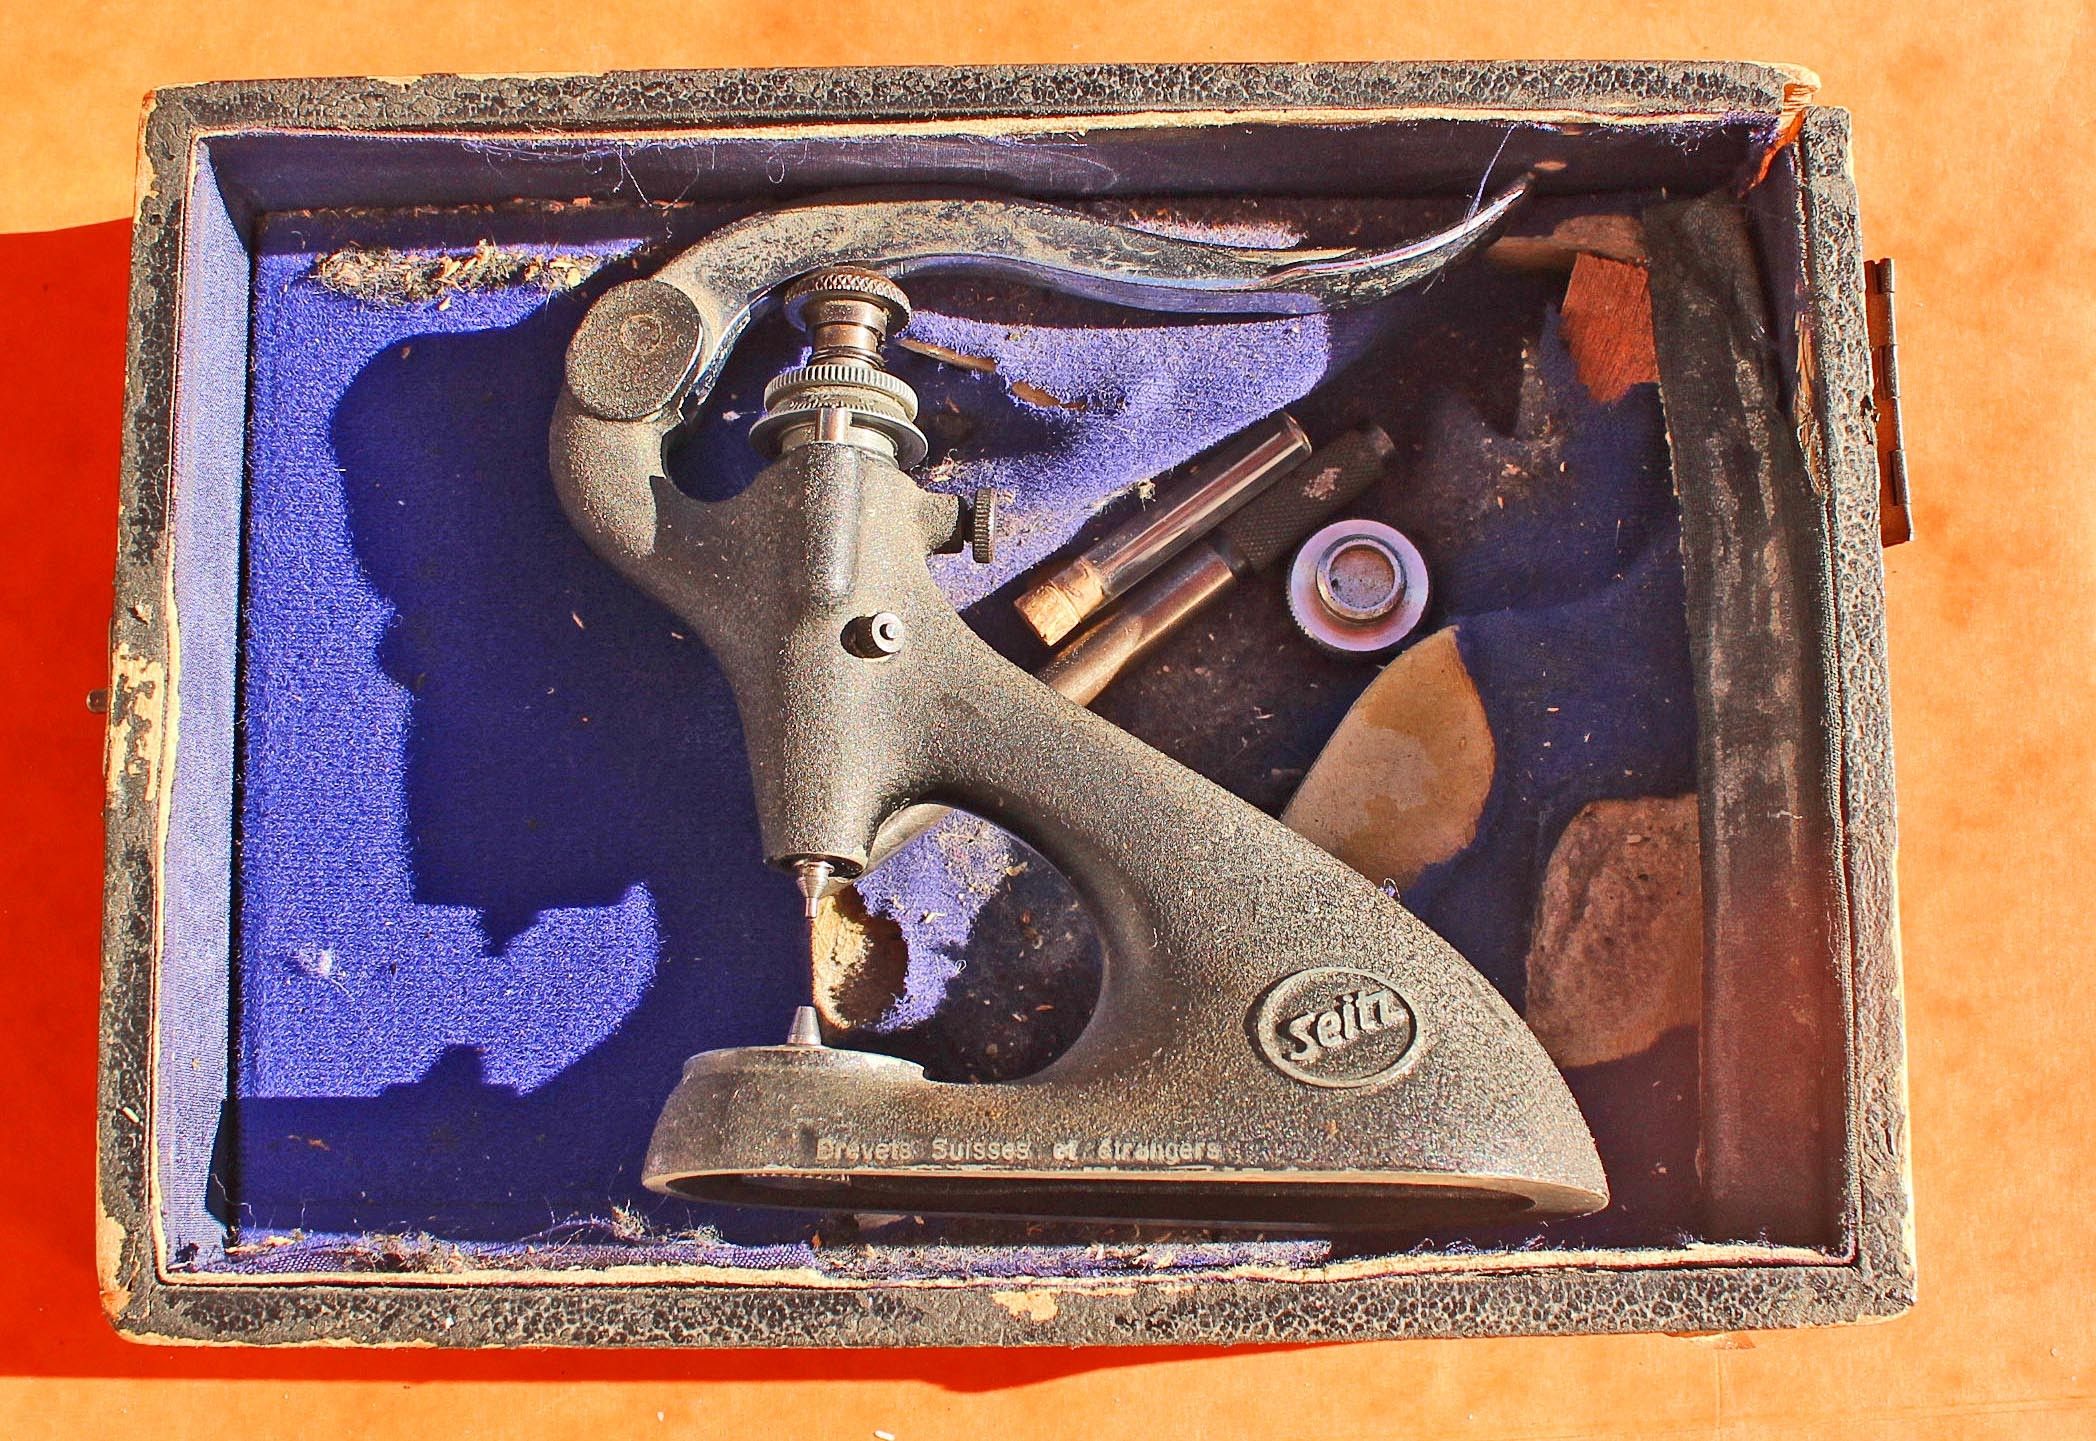 SEITZ Tools for watches horological instruments spares watchmakers